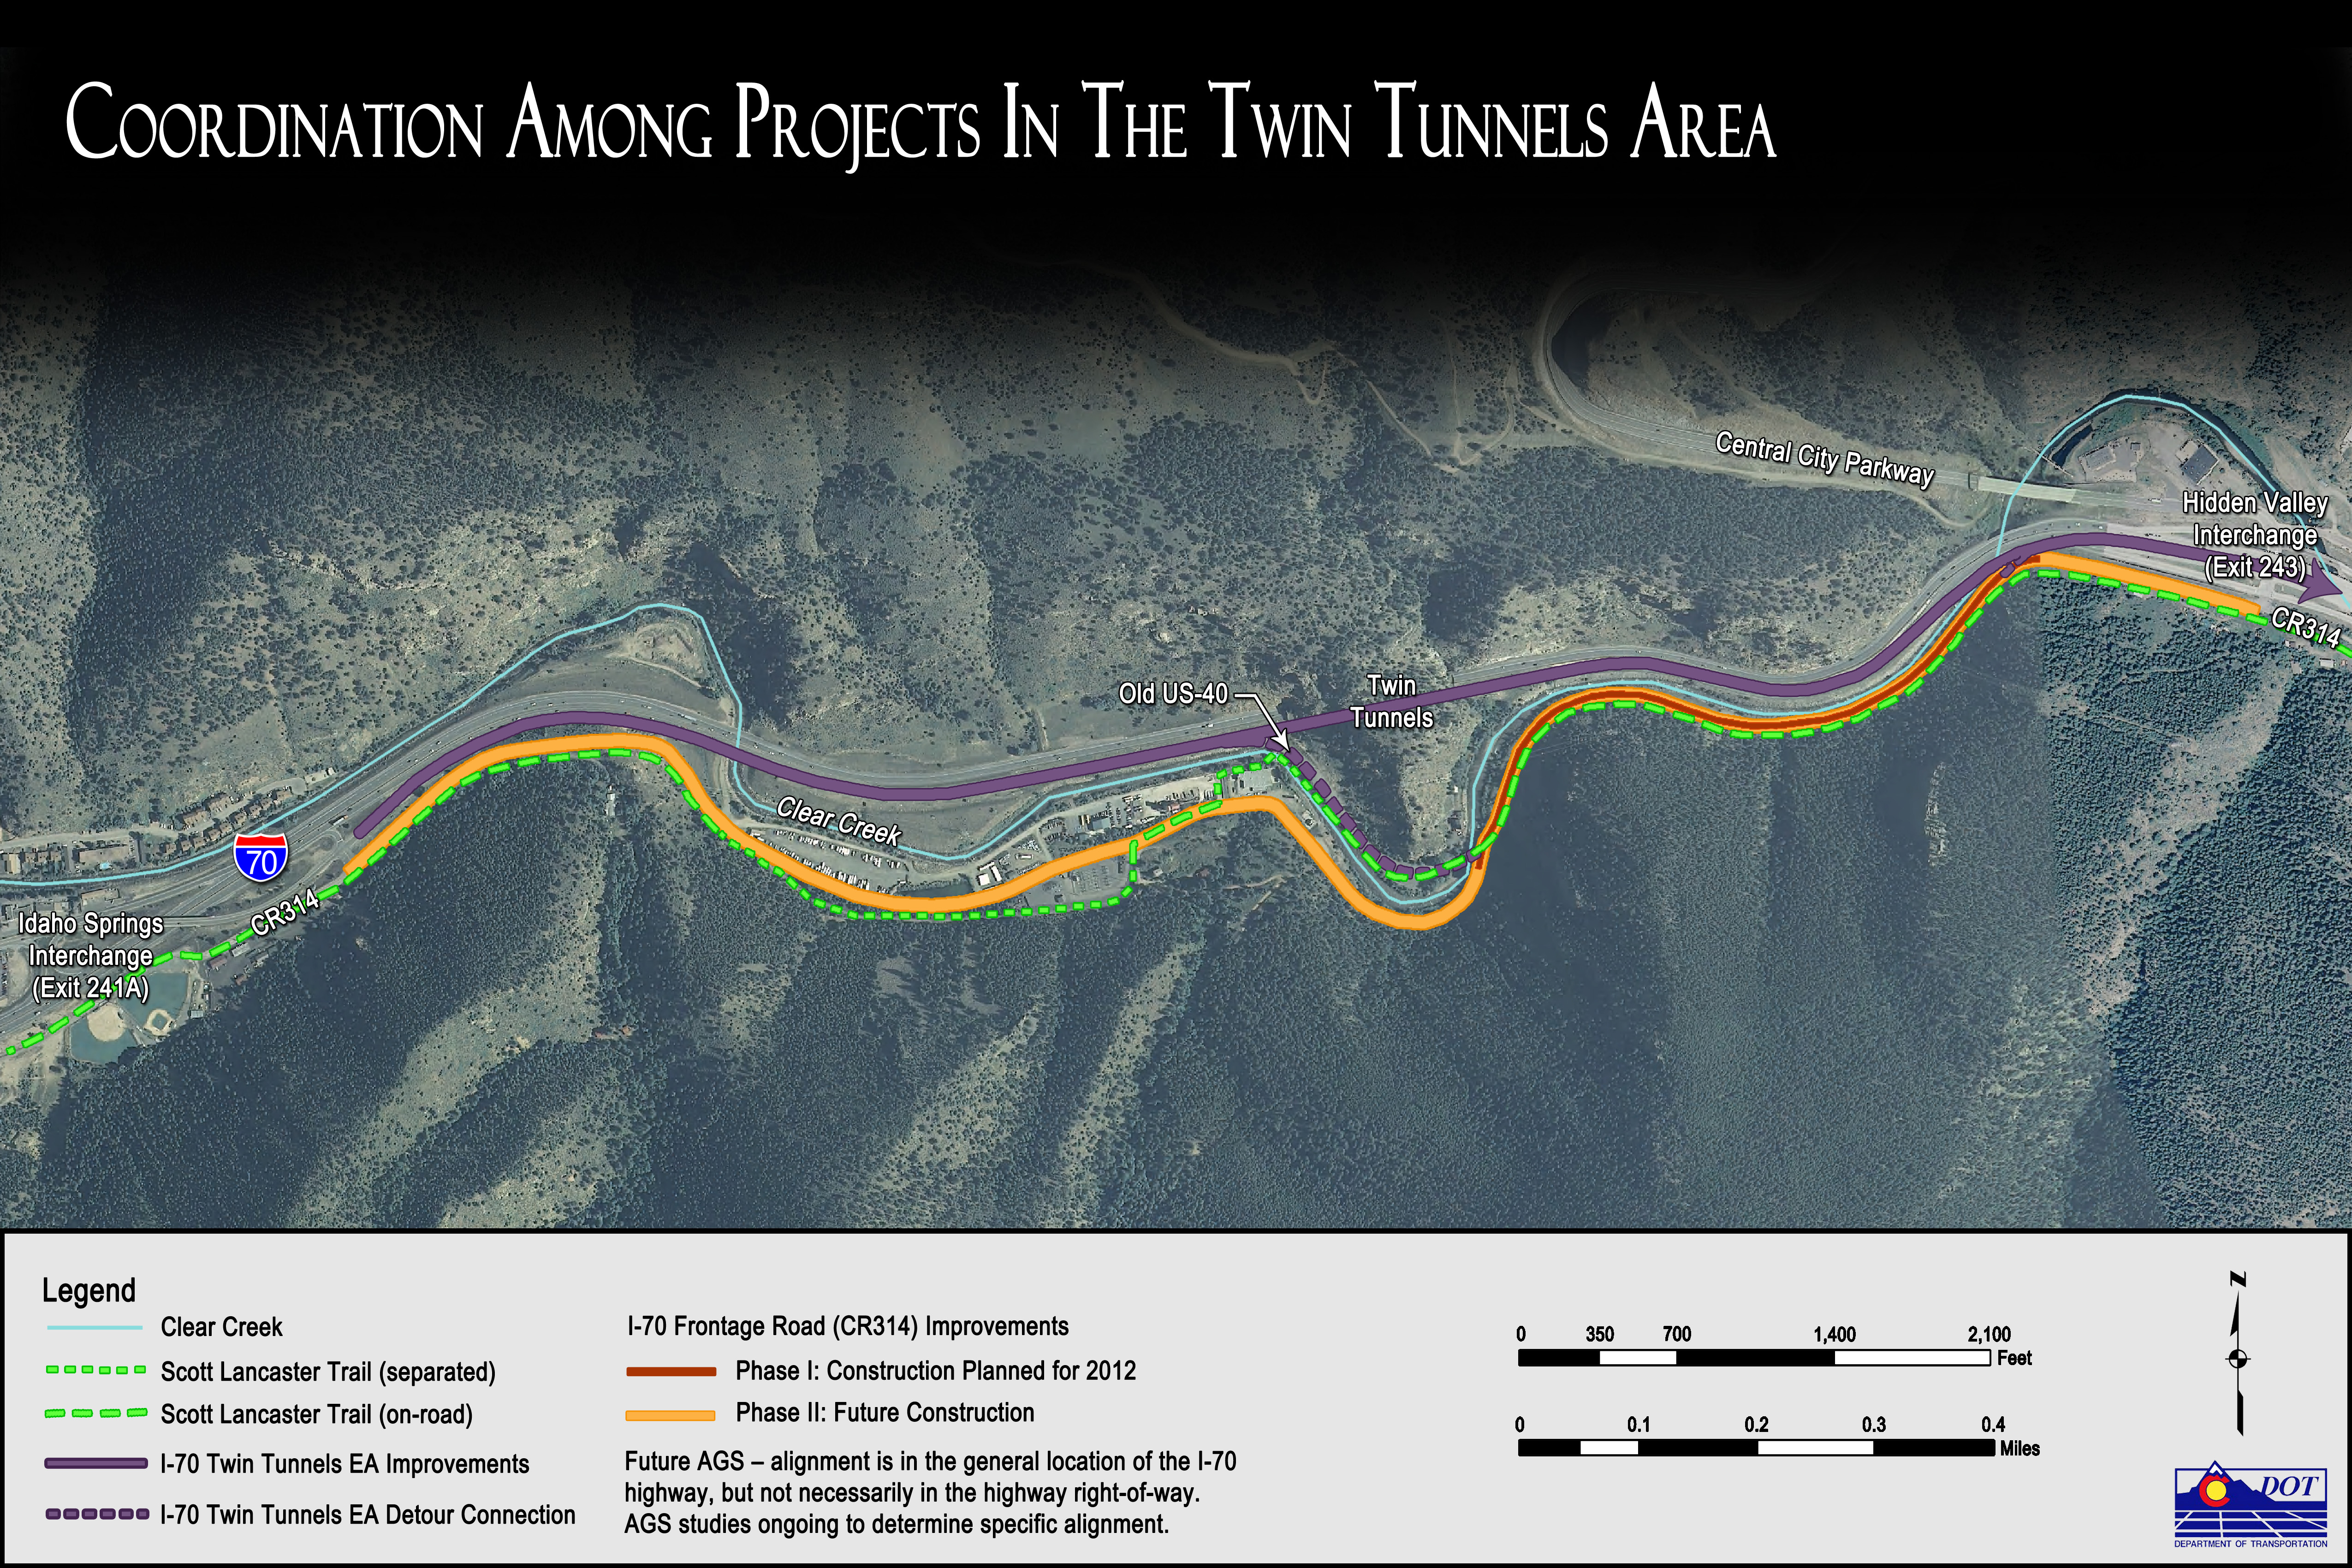 Coordination Among Projects detail image